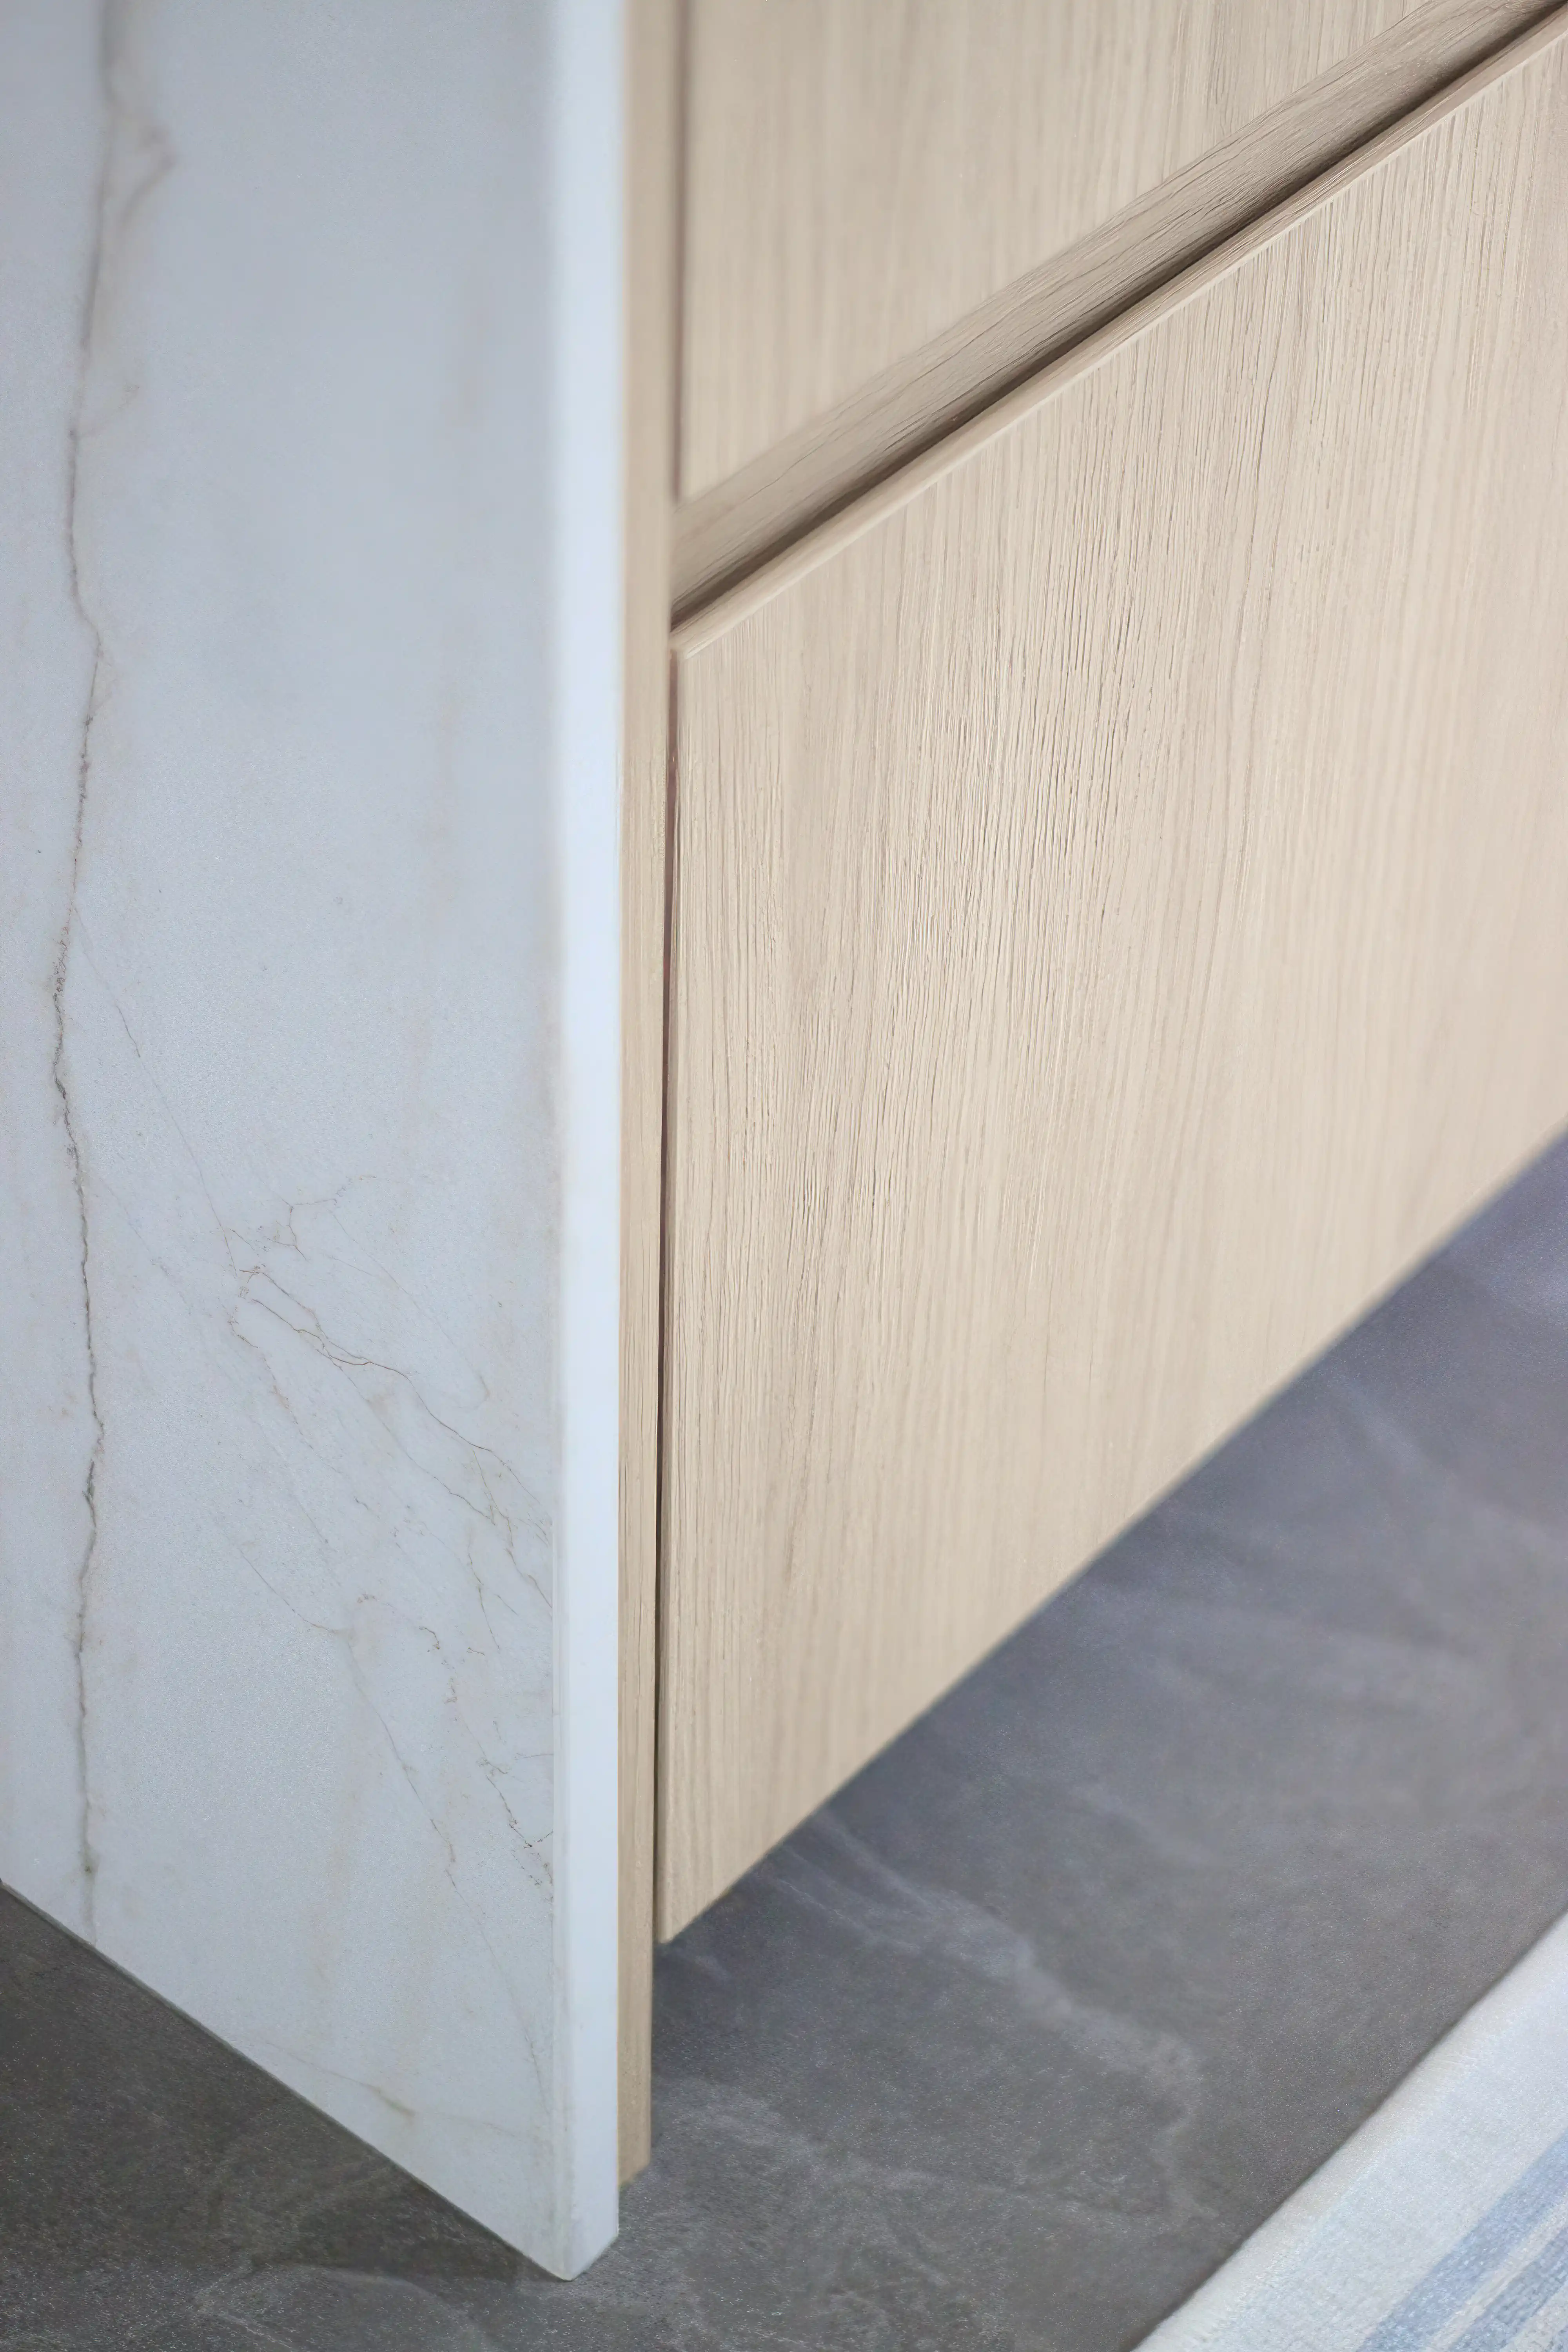 Close-up of a modern interior design featuring a Dekton edge, light wood cabinet, and matte gray flooring, interior by Sarah Brown Design